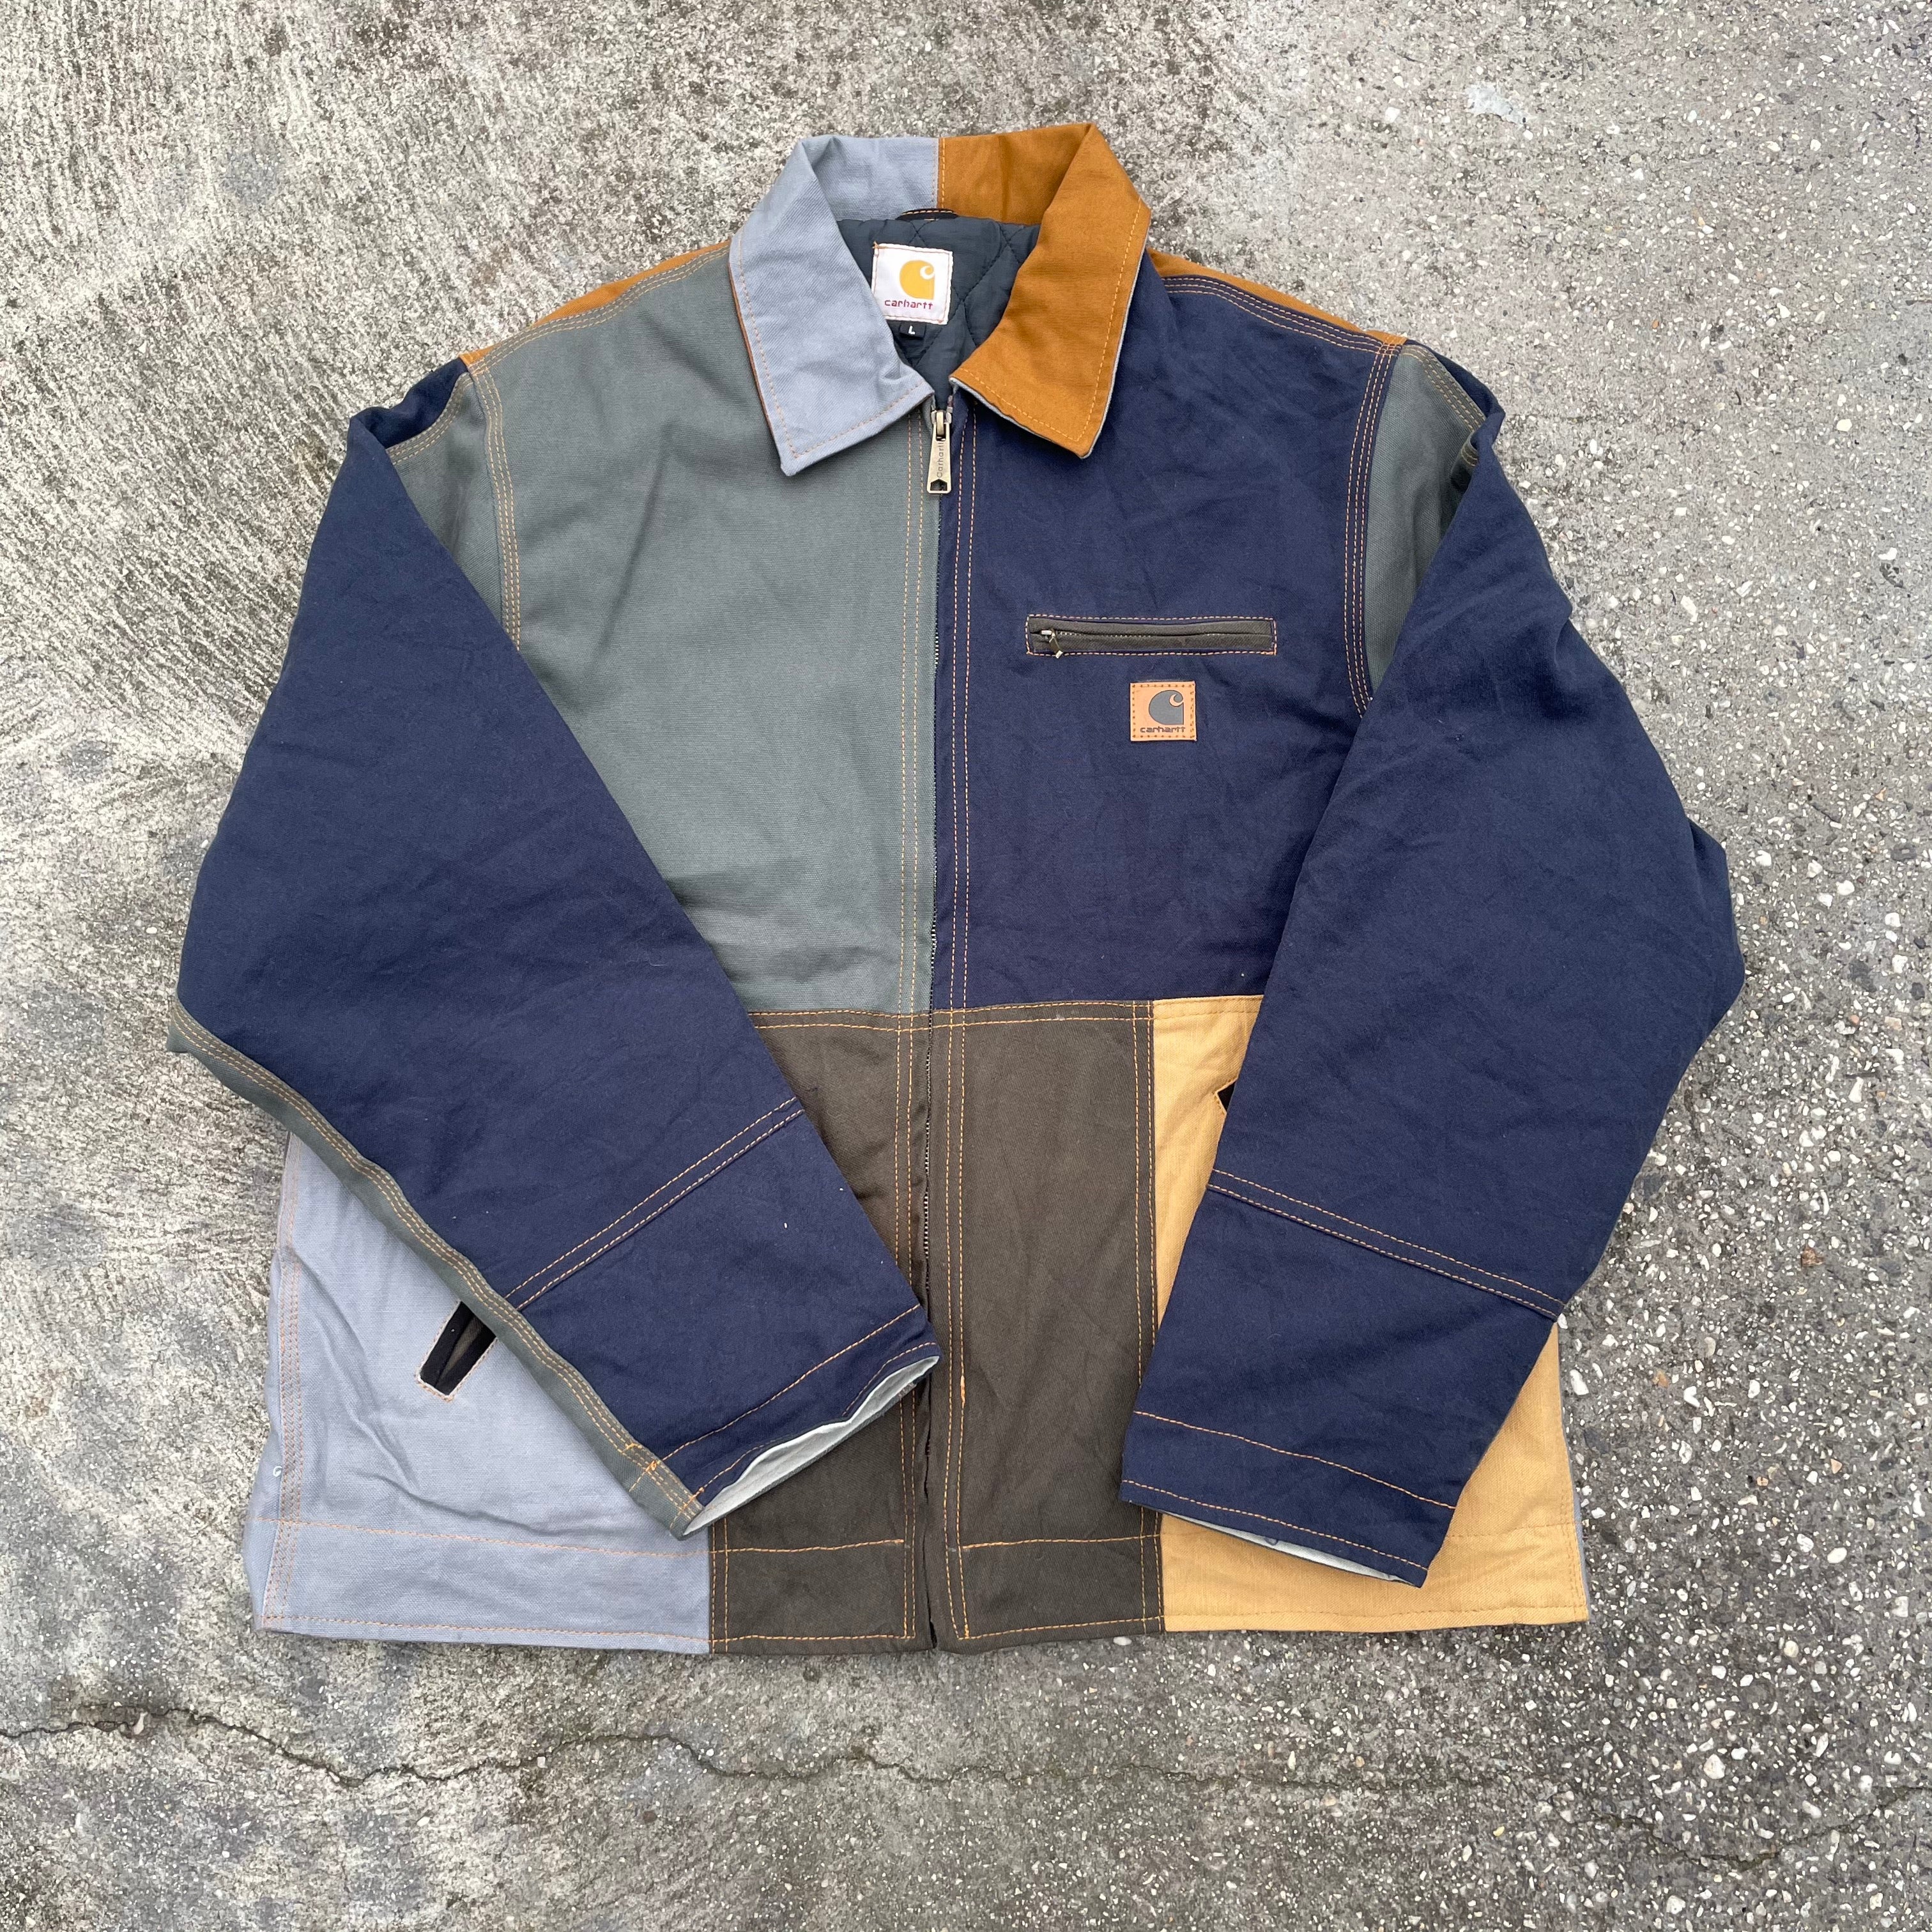 Carhartt Reworked Jacket Quilt Lined Large